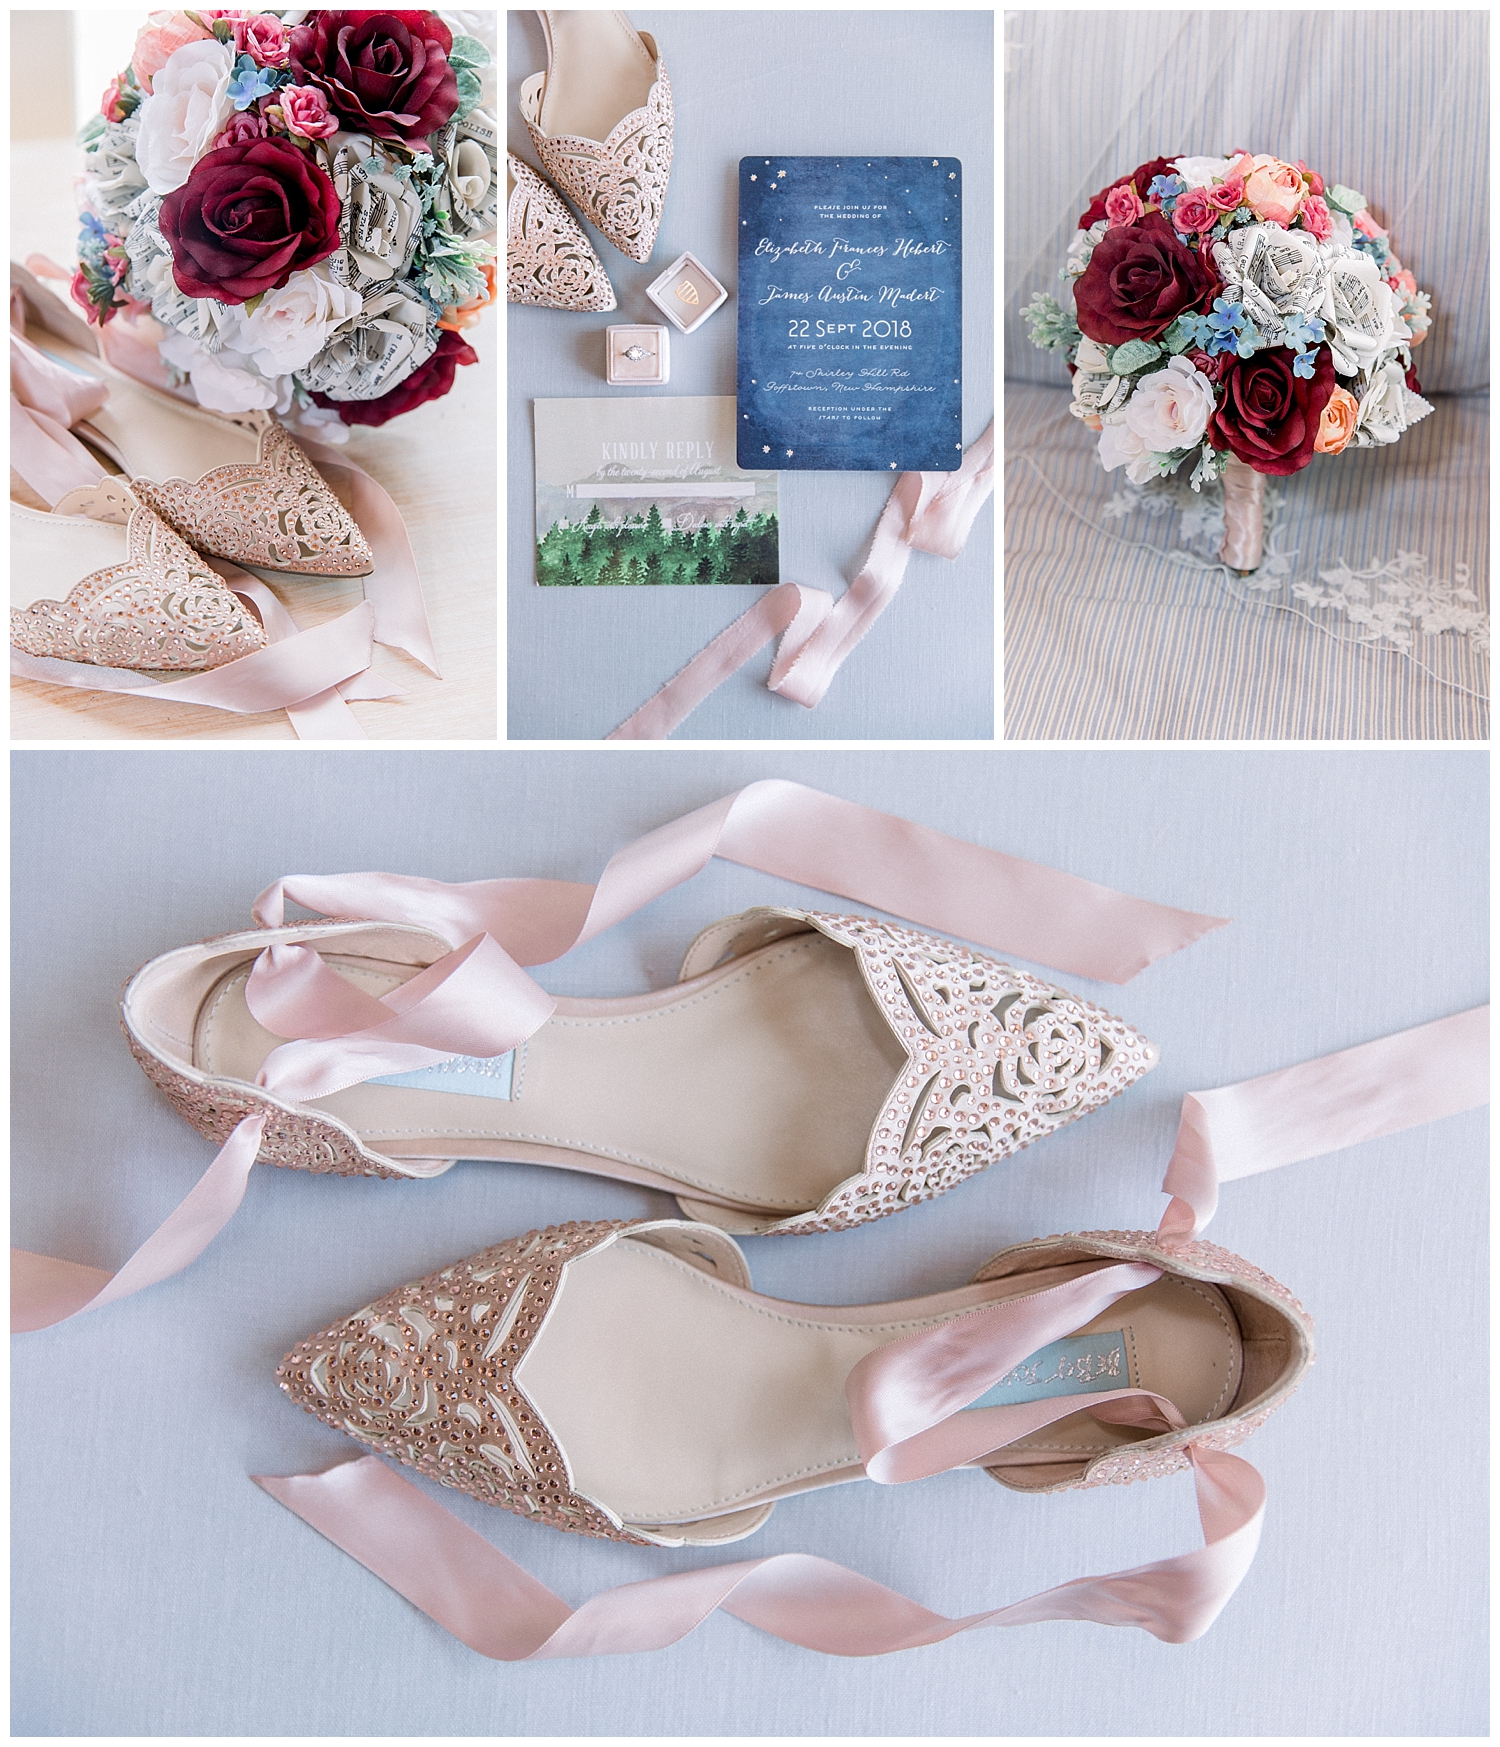 Betsey Johnson wedding shoes at Goffstown, New Hampshire wedding at a private estate. Photography by Halie Olszowy.